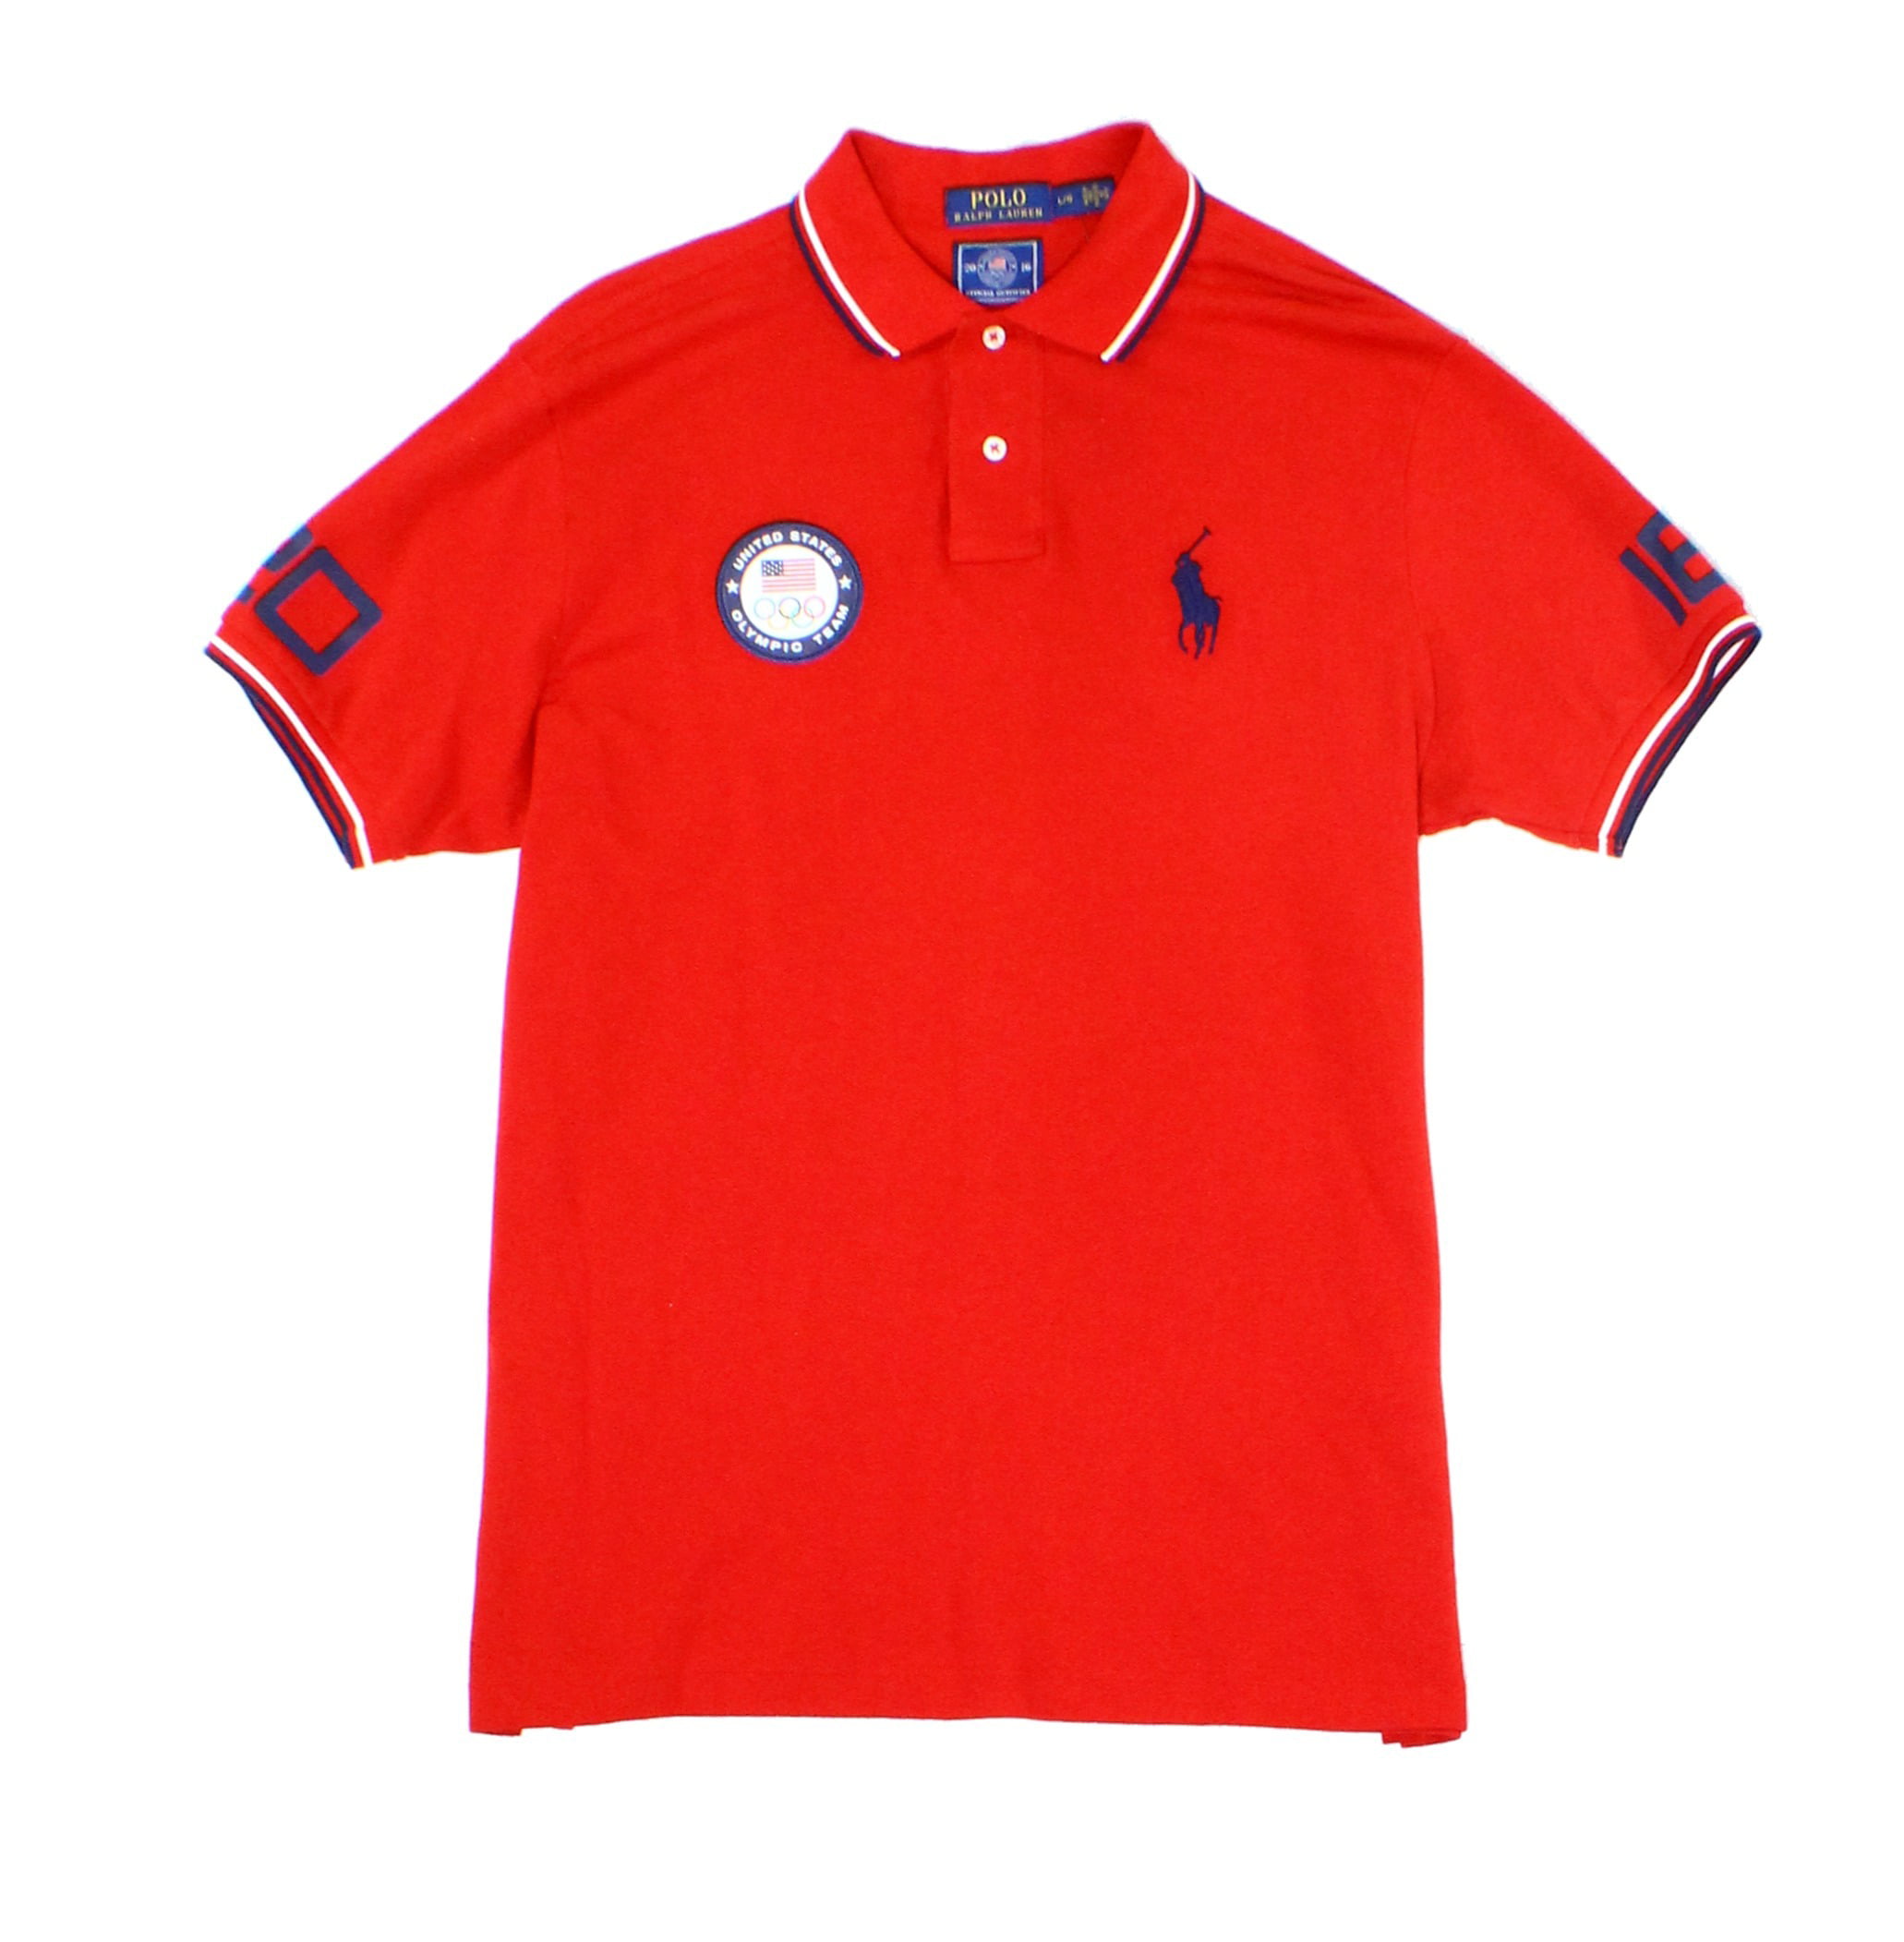 Polo Ralph Lauren - Polo Ralph Lauren NEW Red Mens Size 2XL Polo Rugby ...